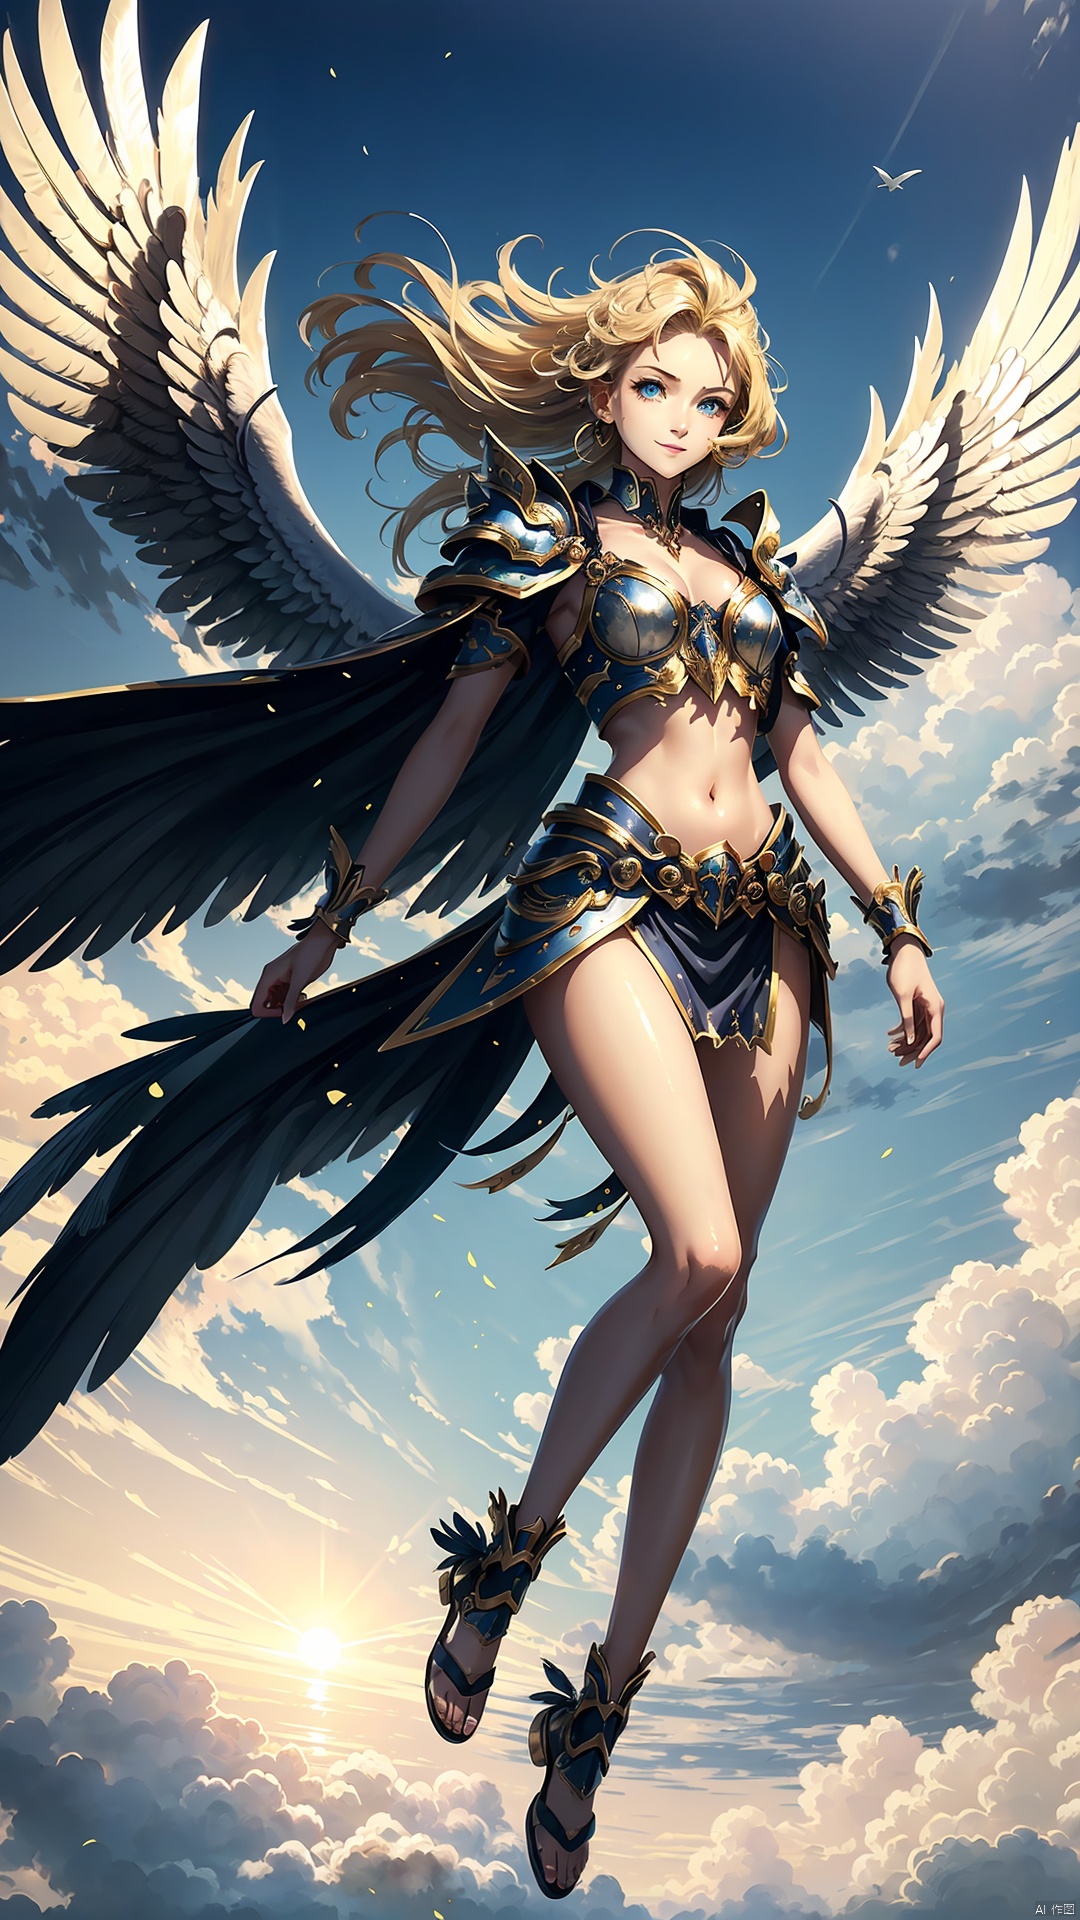 Flying, in the air,(flying in the air:1.1),(only A pair of giant wings:1.1),Masterpiece, Best quality,solo,facing the audience,up close,(full body:1.2),An archangel, flying in the sky, beauty, she has the wings of an eagle, wings spread out in the sky soaring, standard beauty, medium breasts, half-naked upper body, silver armor, thighs exposed, collarbone exposed, nine heads, behind the blue sky and white clouds, a storm is coming, blond hair, long hair, hair fluttering in the wind, blue eyes, big eyes, Beautiful eyes, delicate features, thin waist, bare navel, smiling expression, ready to dive down, feathers flying in the sky, the sun beating down on the earth,Beautiful face, delicate features, beautiful face,Suspended in the air, feet off the ground,The sun shone on her face,